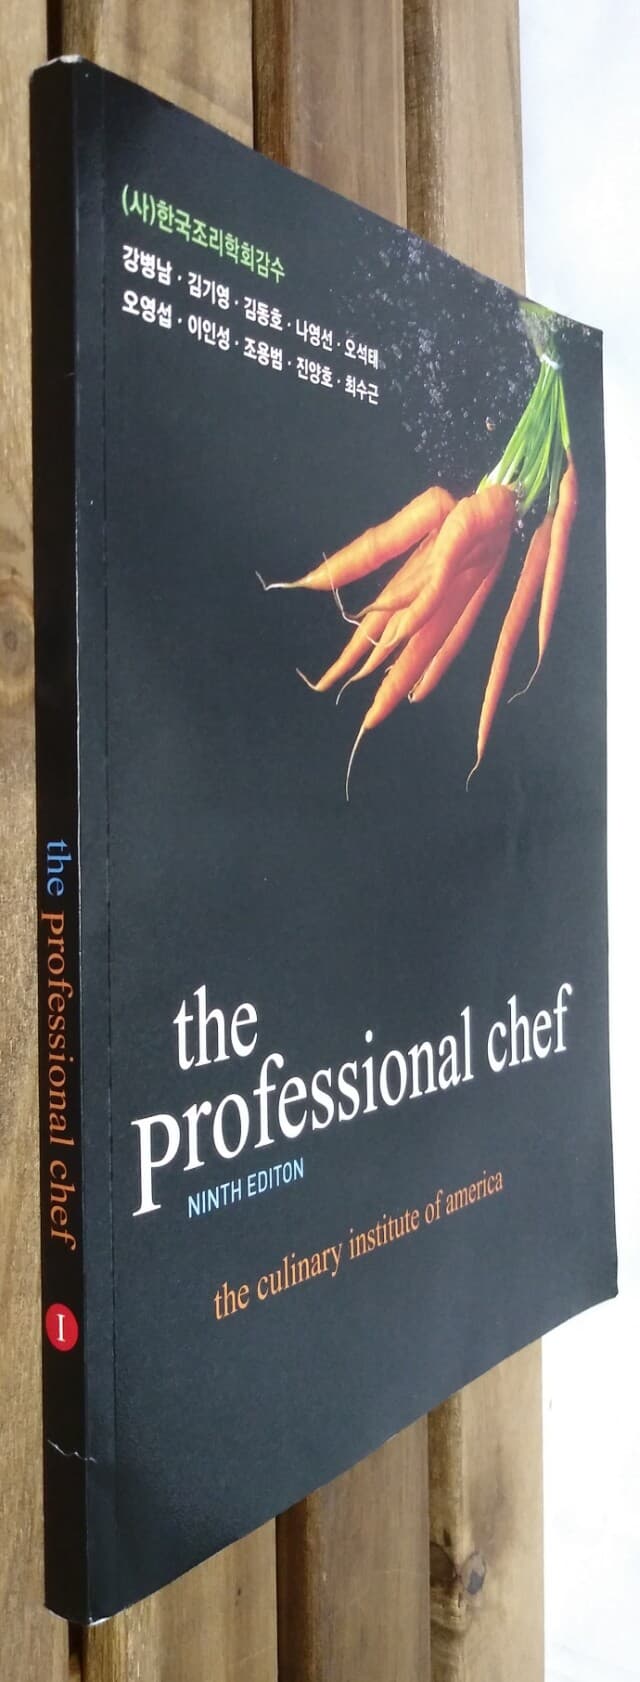 the professional chef Ⅰ